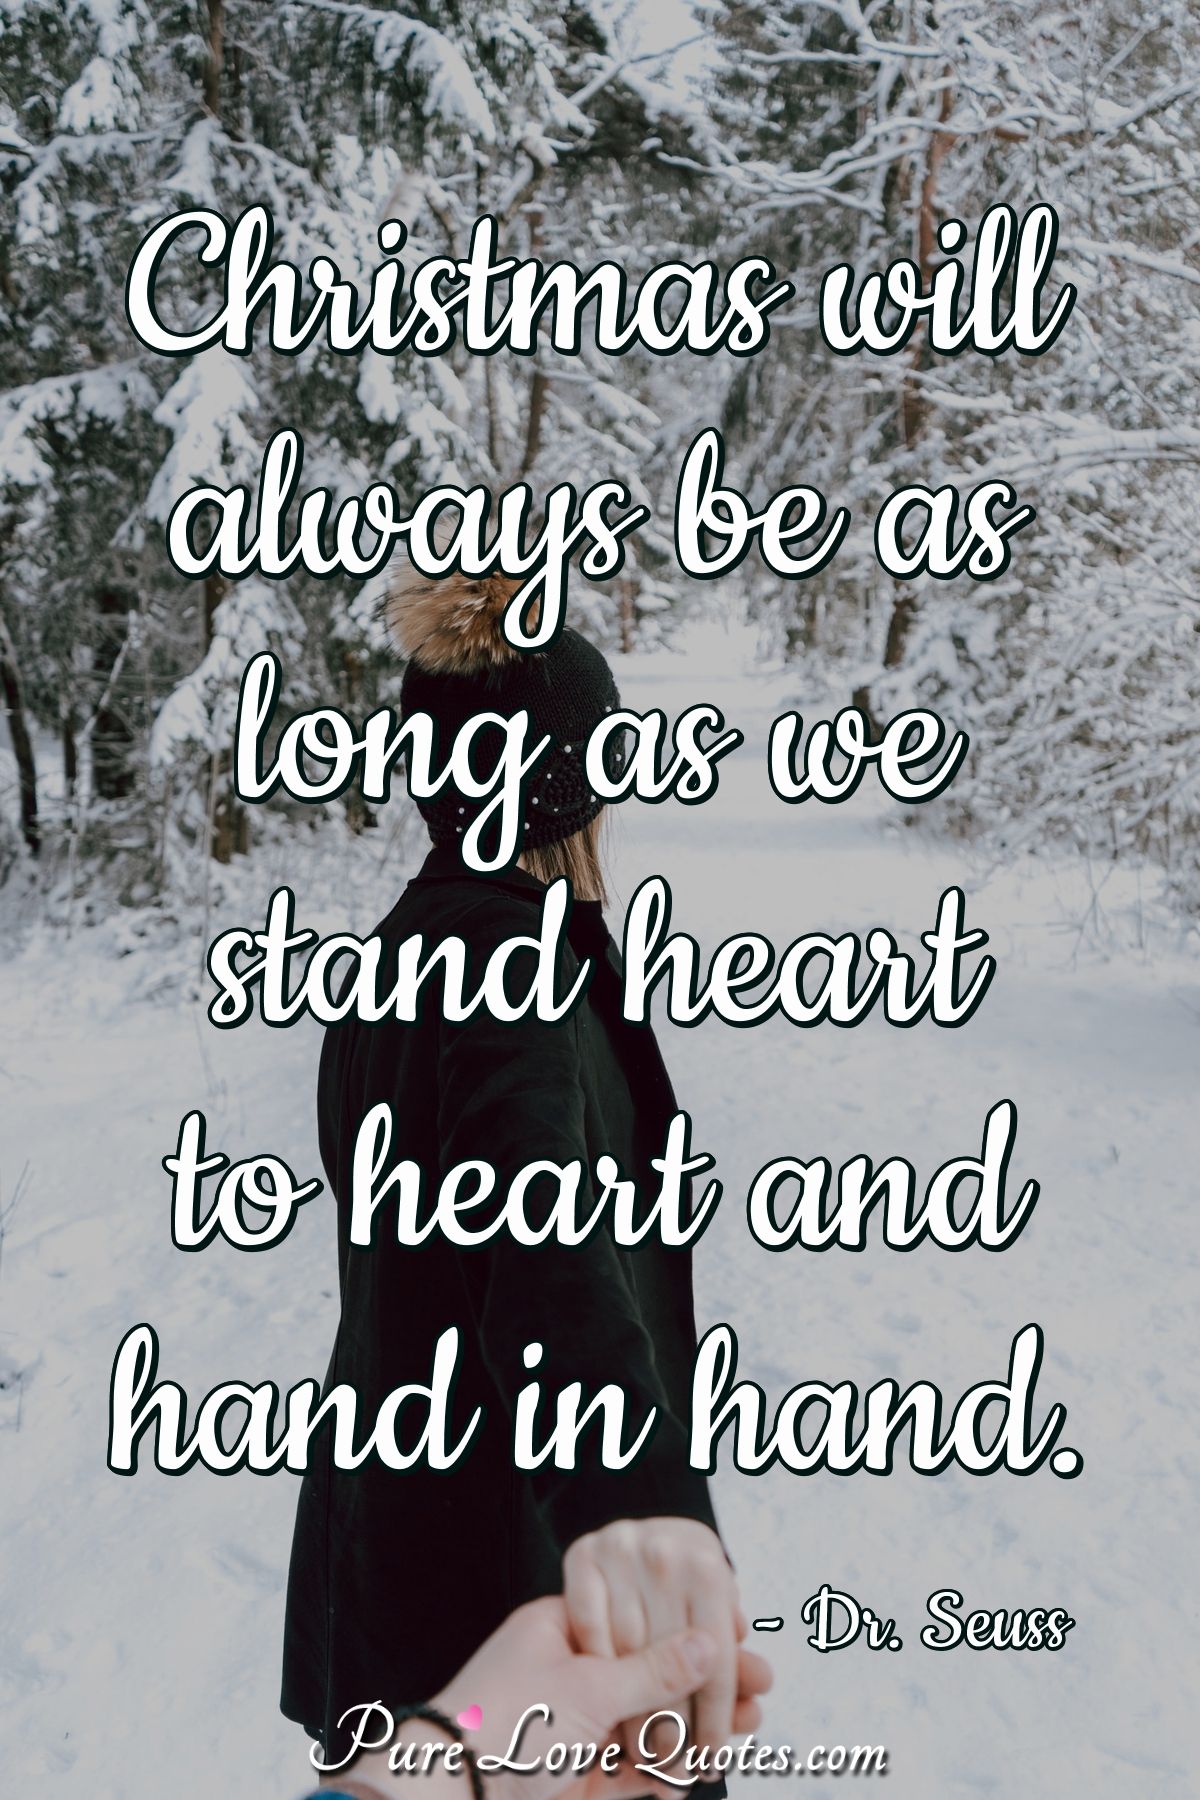 Christmas will always be as long as we stand heart to heart and hand in hand. - Dr. Seuss